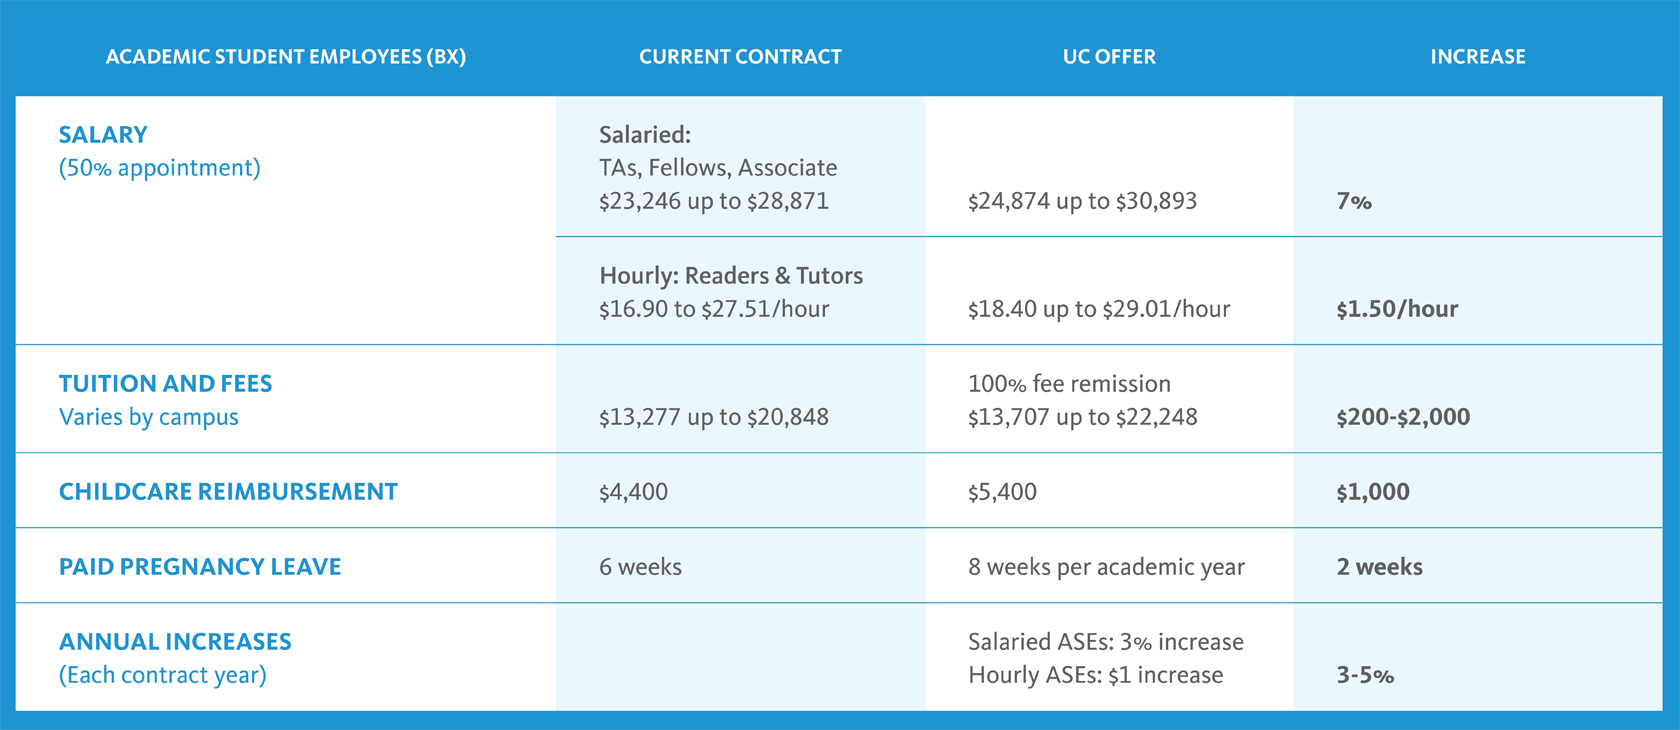 Chart showing current contract and the offer from UC for academic student employees